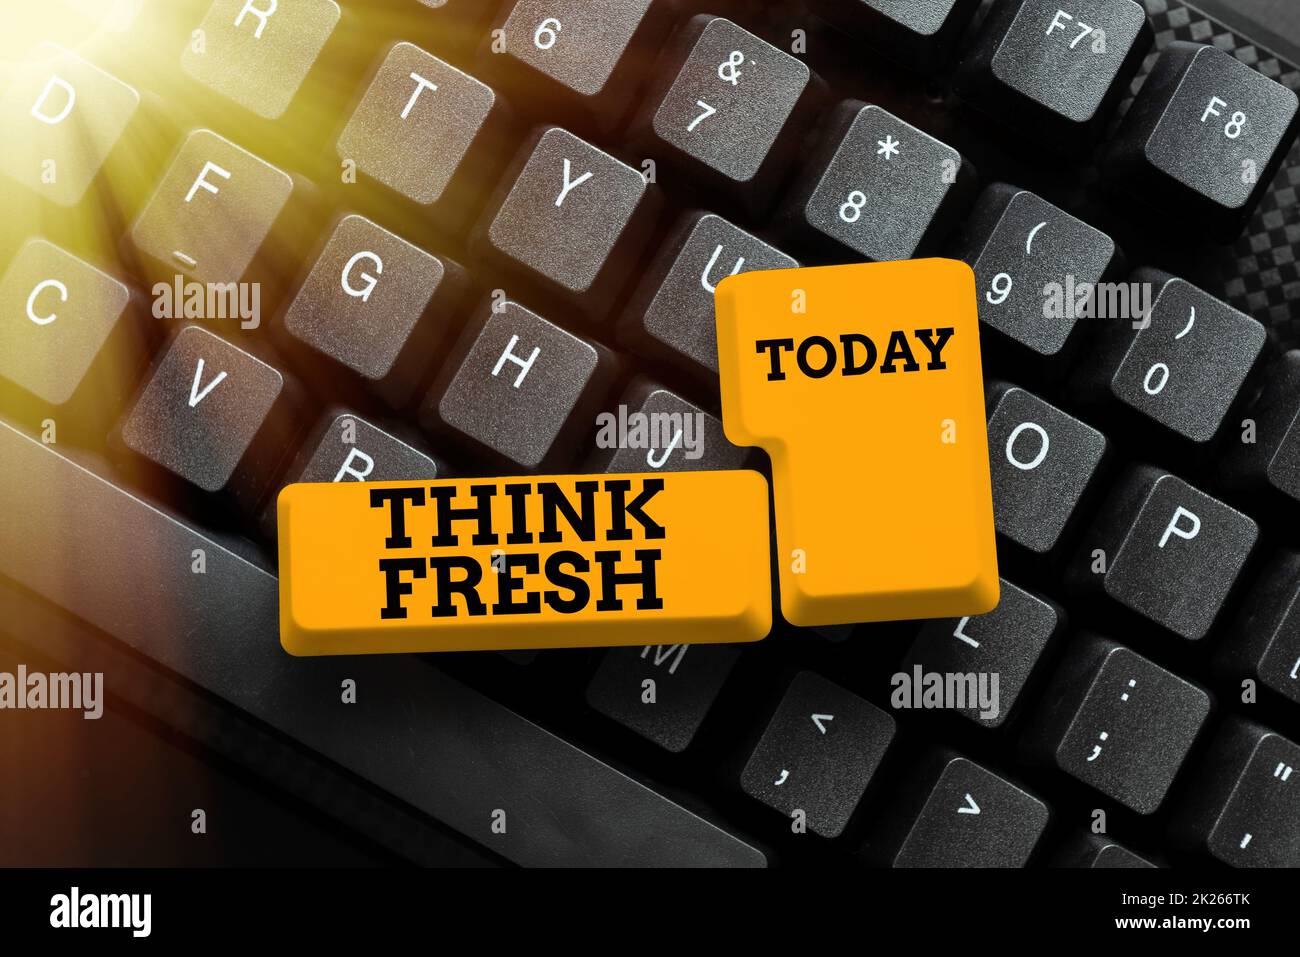 Text sign showing Think Fresh. Concept meaning a new perspective of thinking when producing ideas and concepts Connecting With Online Friends, Making Acquaintances On The Internet Stock Photo